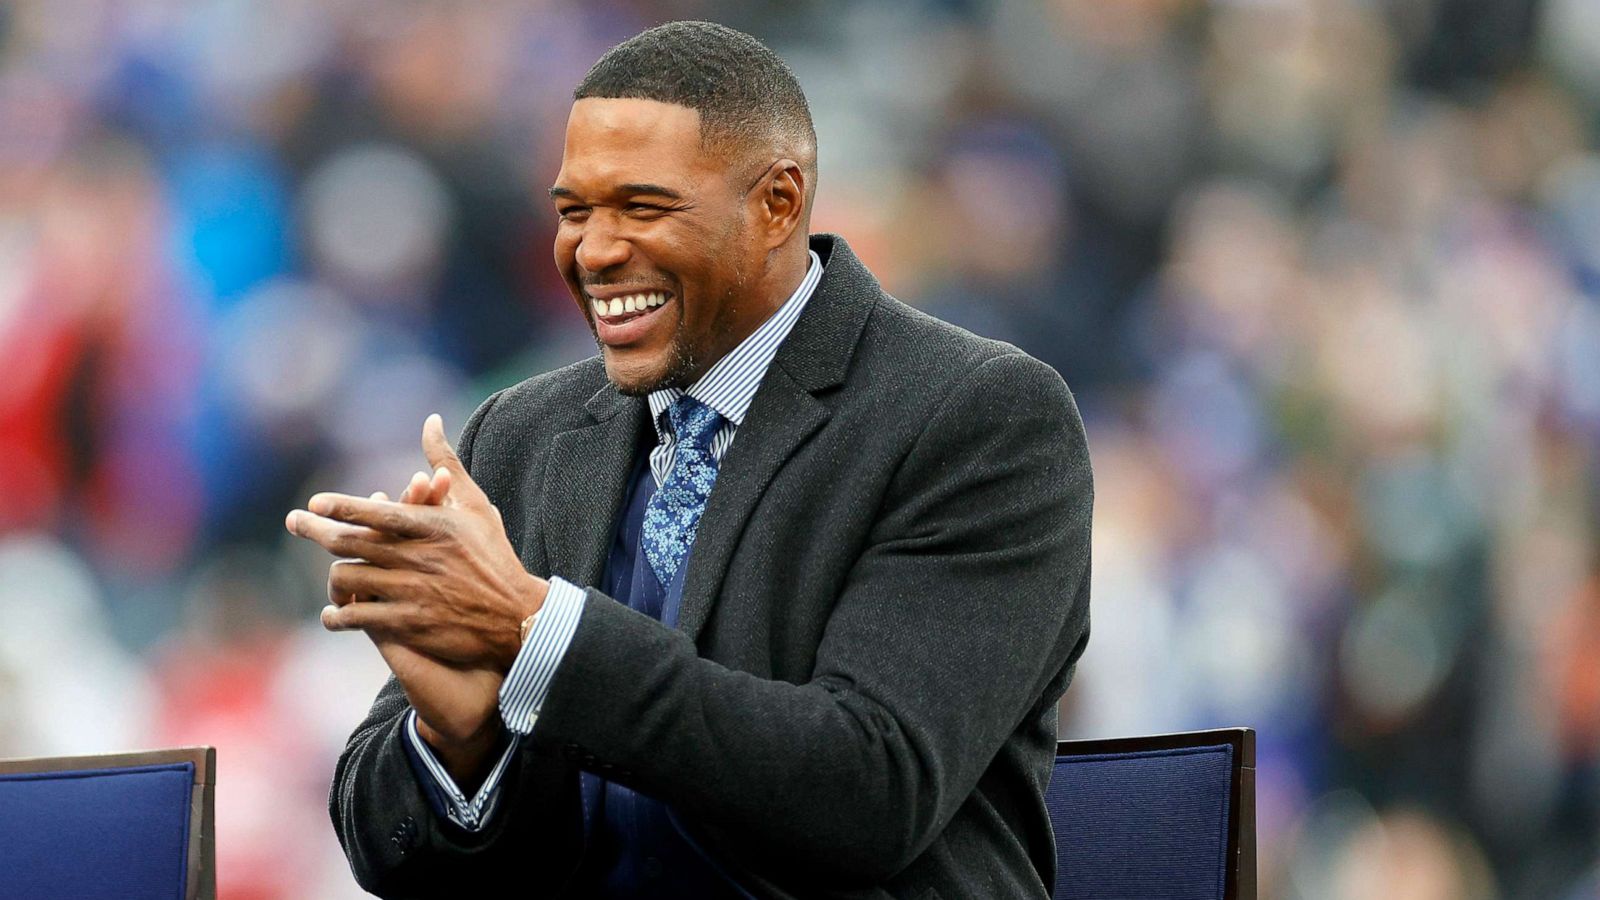 Michael Strahan, whose number will be retired, remains an icon for